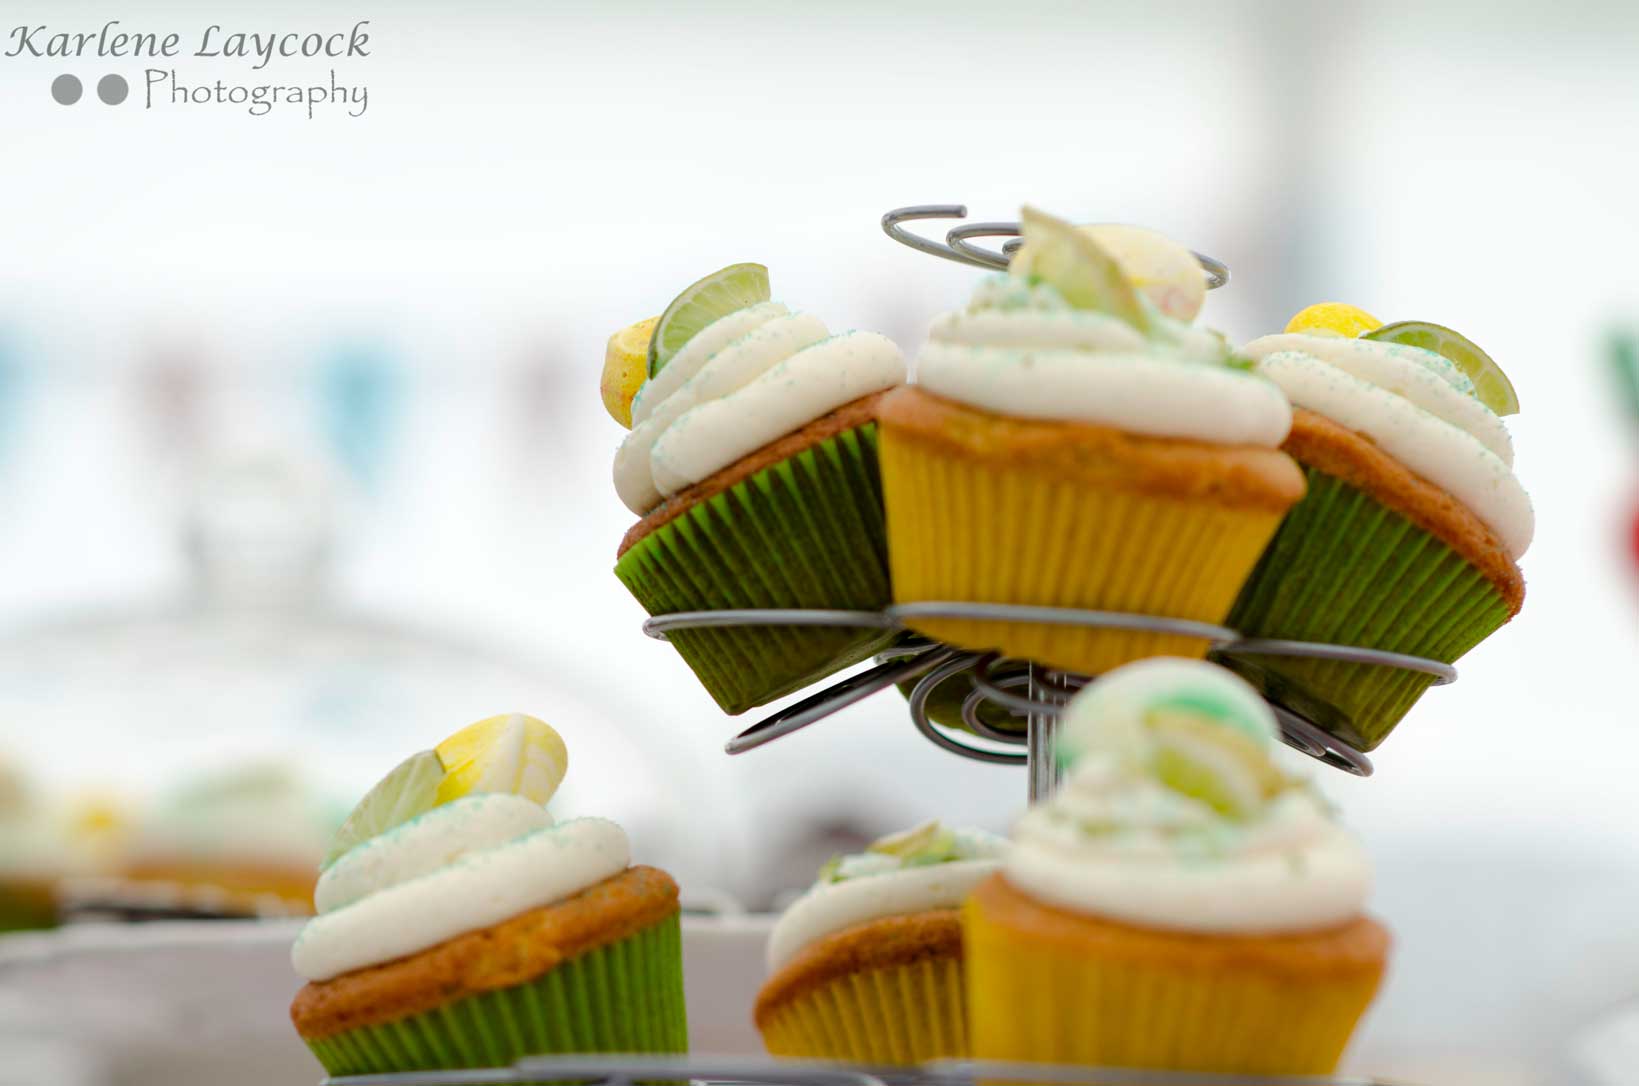 Image of Lemon and Lime Cupcakes taken at a Local Bake Off Competition